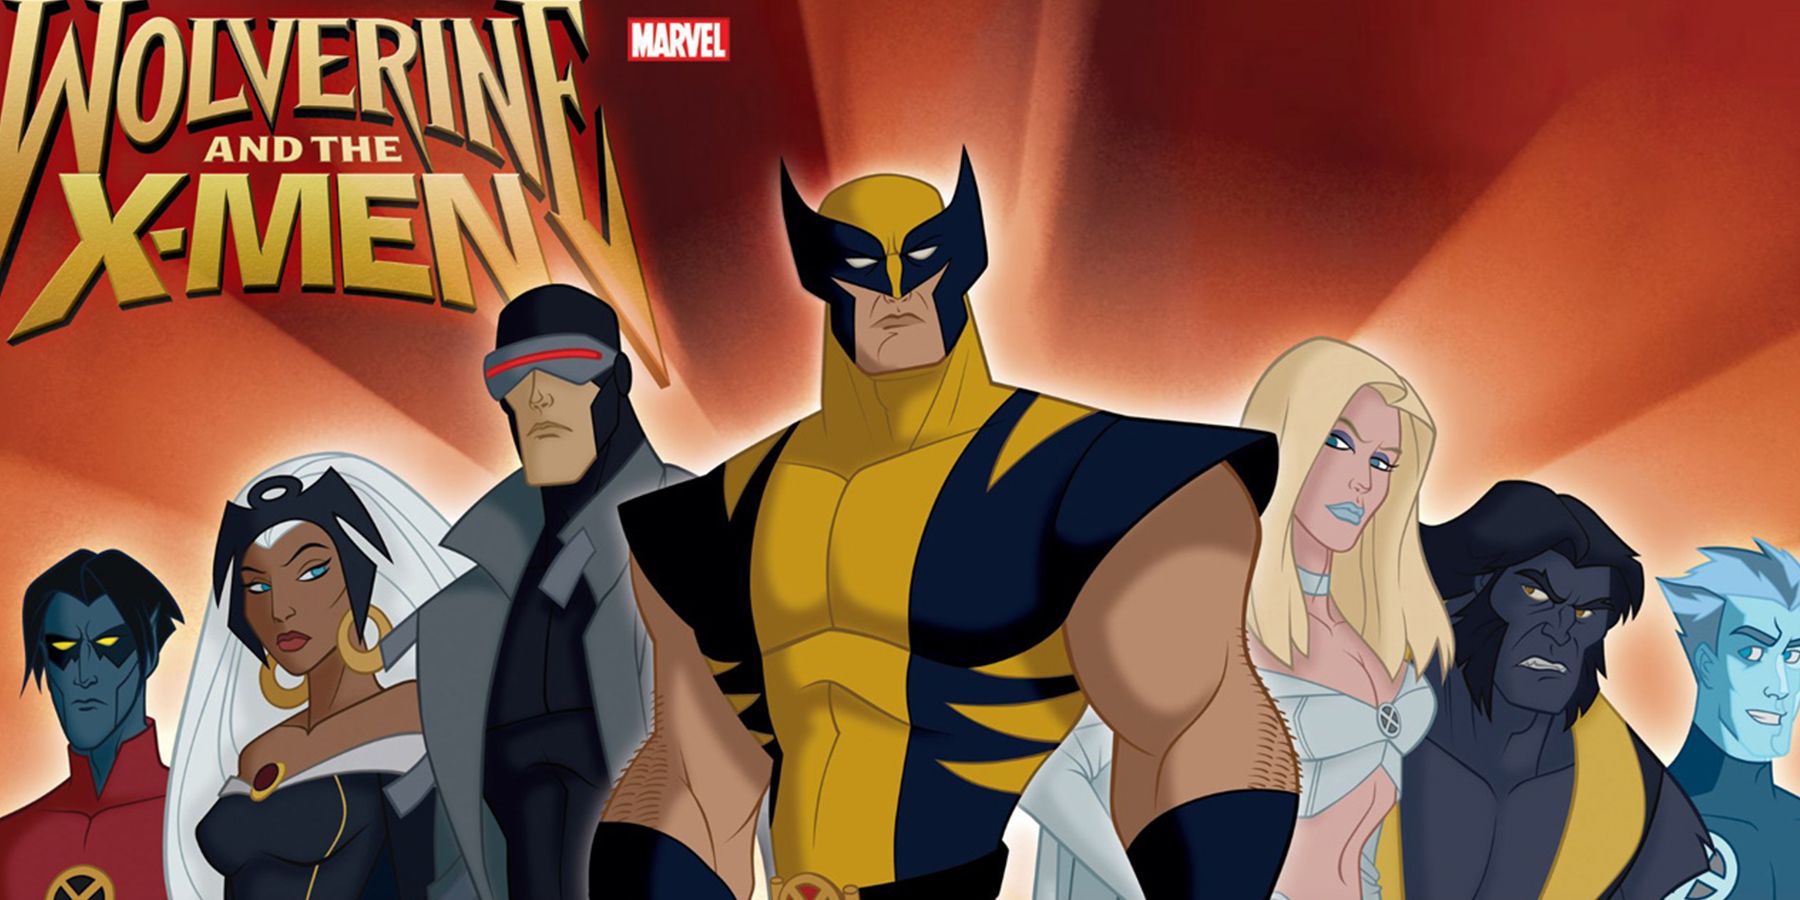 A picture of Wolverine standing with the X-Men in the TV show